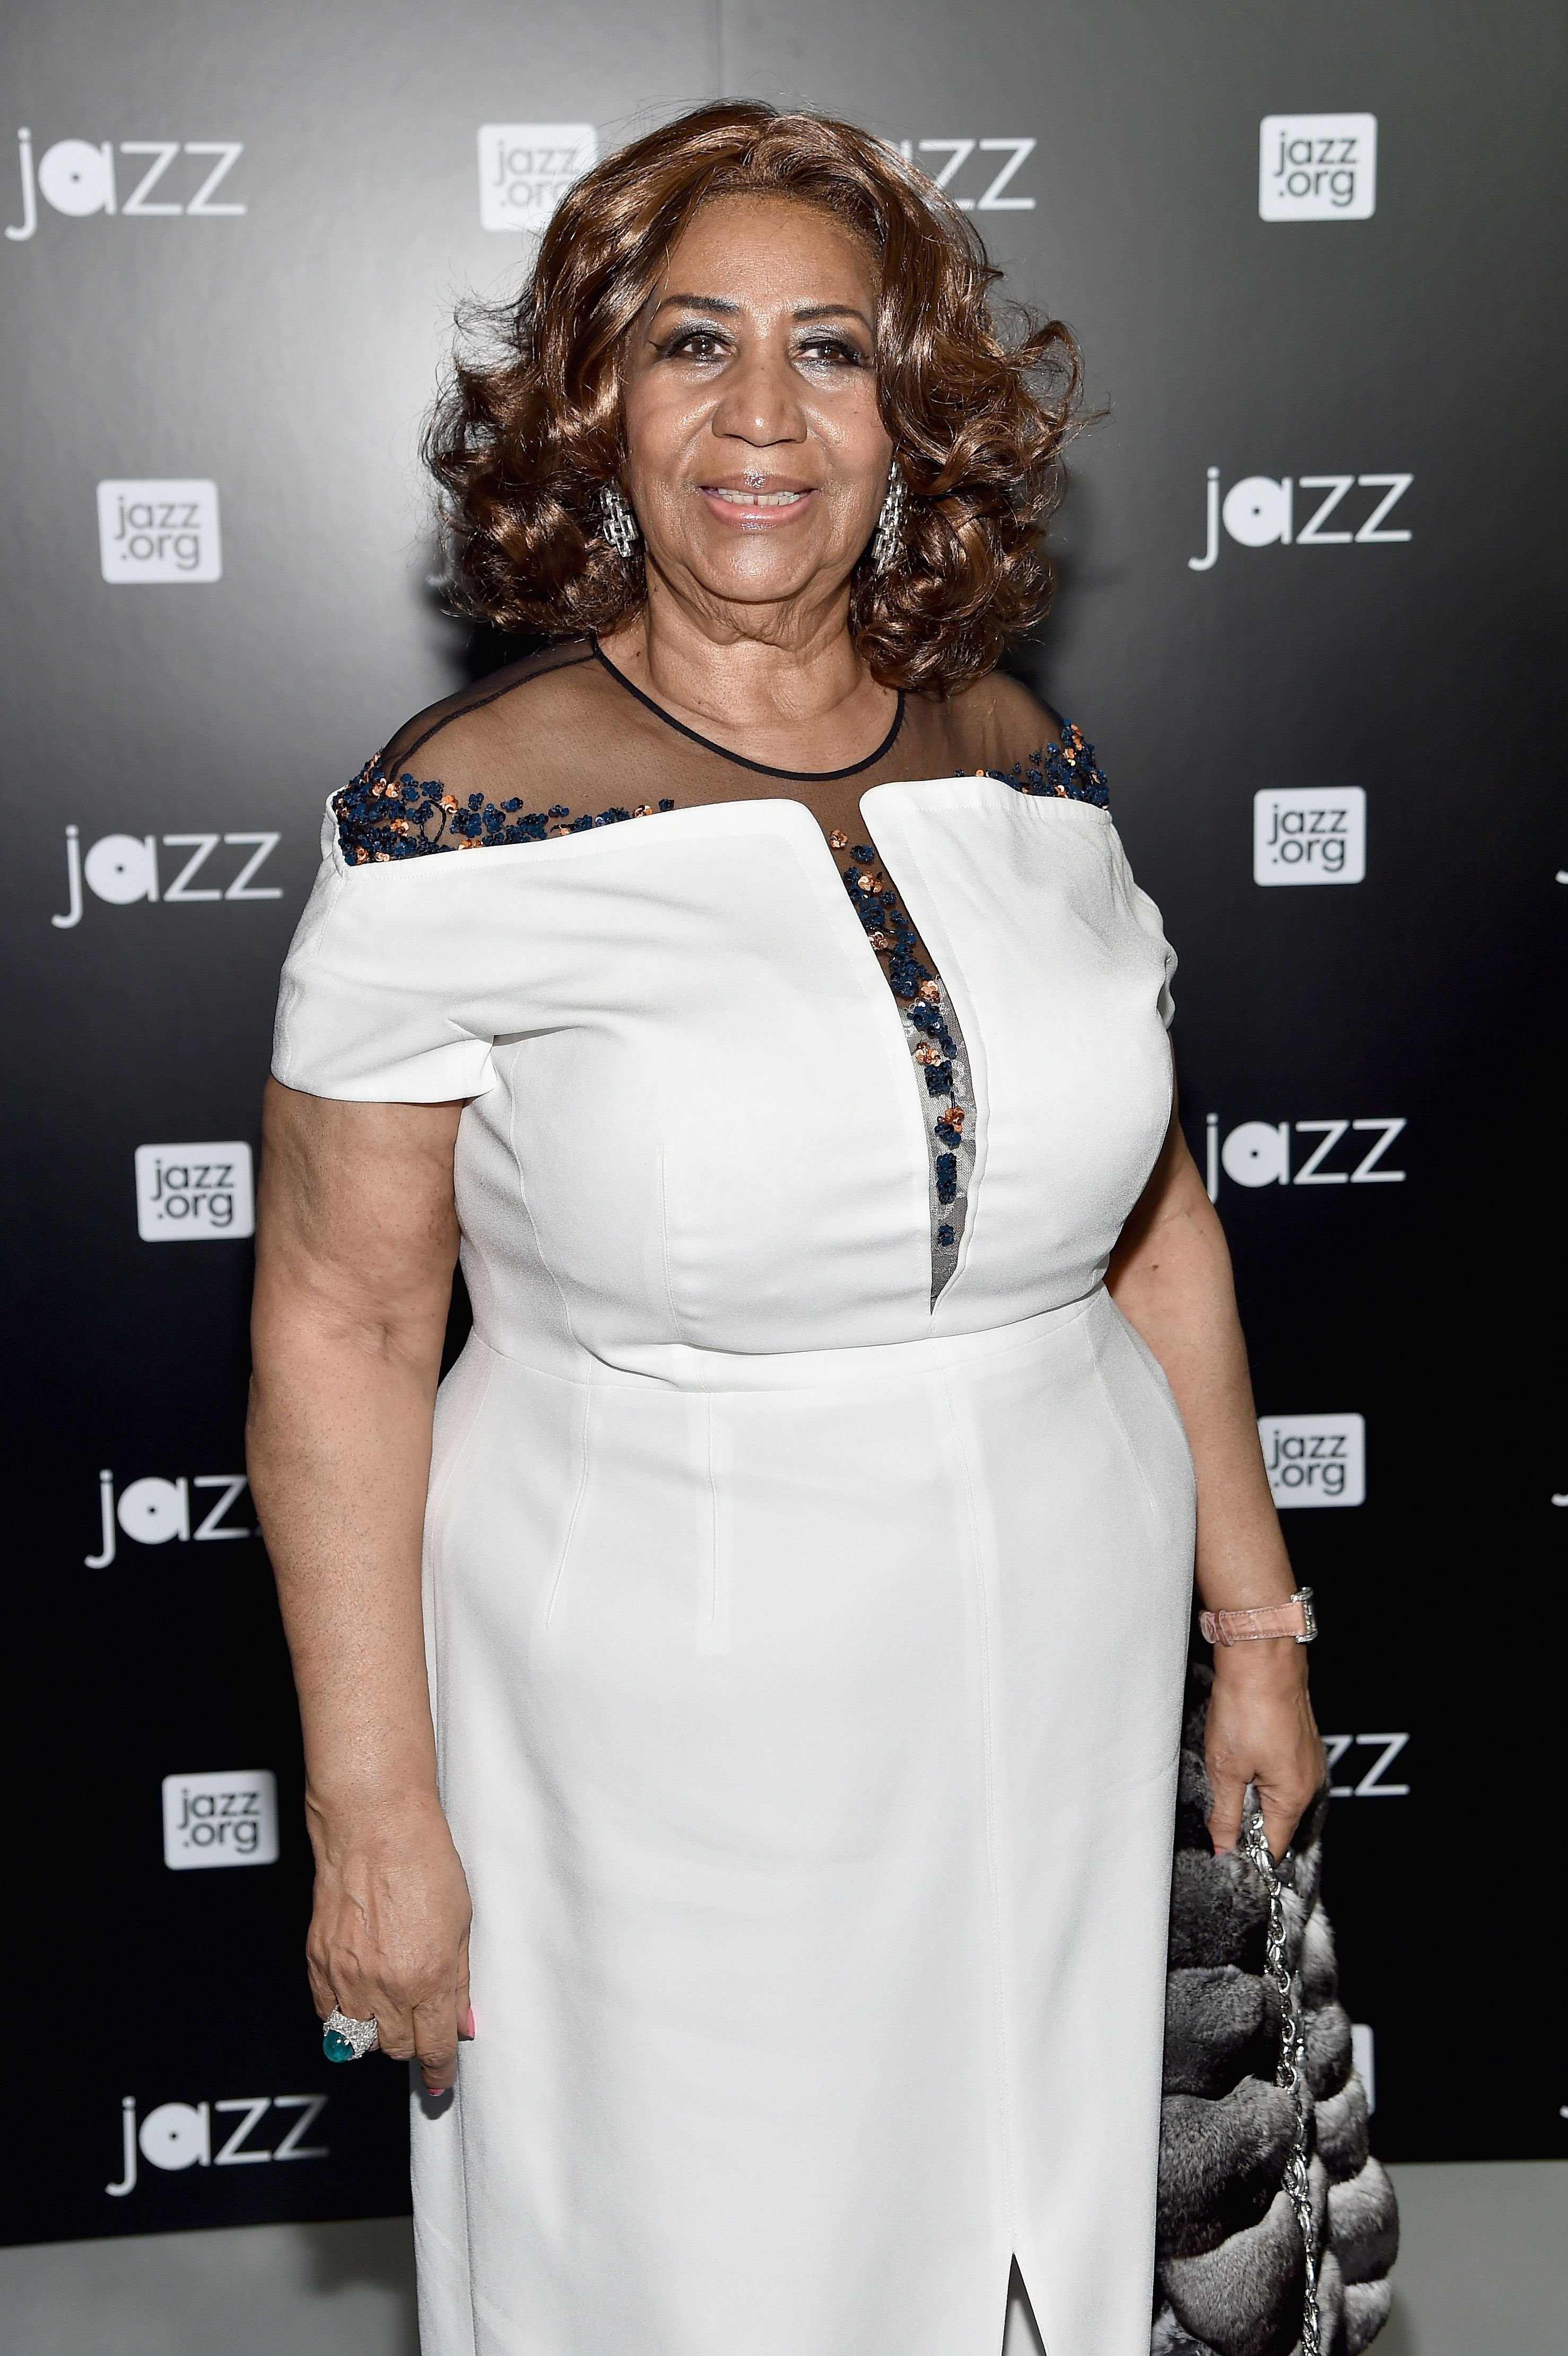 Late musician Aretha Franklin at the opening of the Mica and Ahmet Ertegun Atrium at Jazz at Lincoln Center on December 17, 2015 | Source: Getty Images